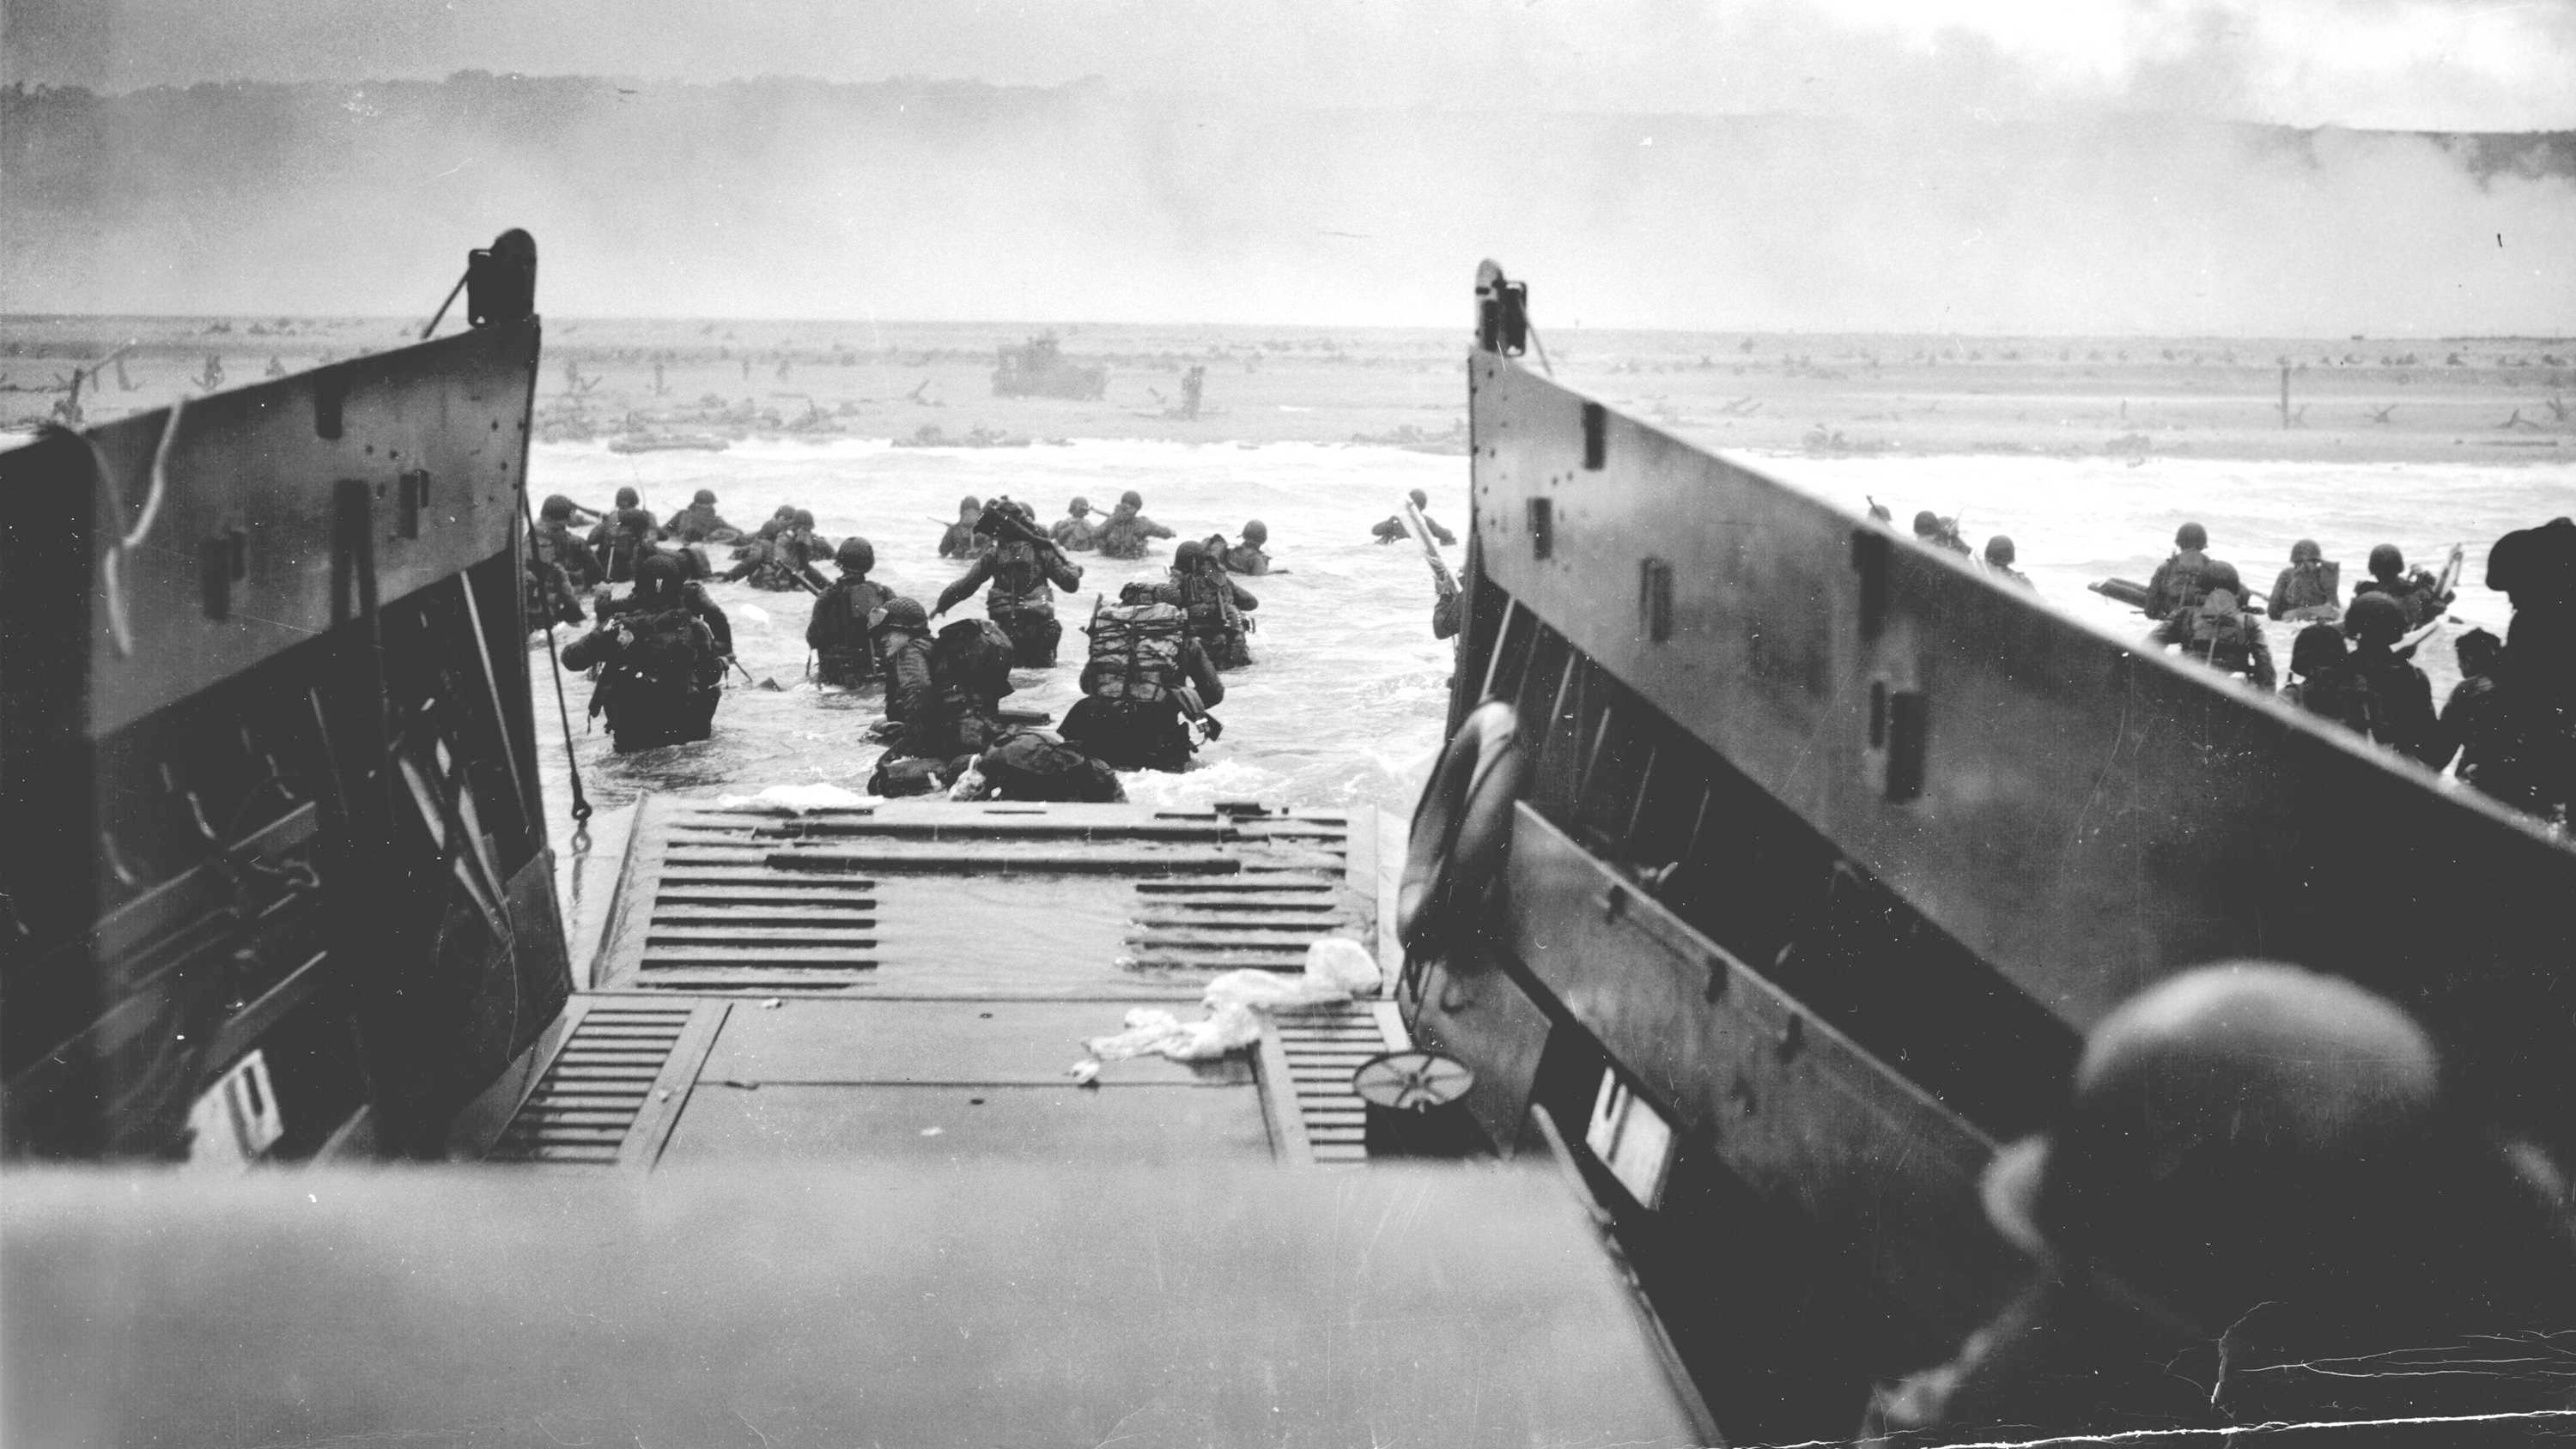 THE 100 DAYS - 1944, Normandy